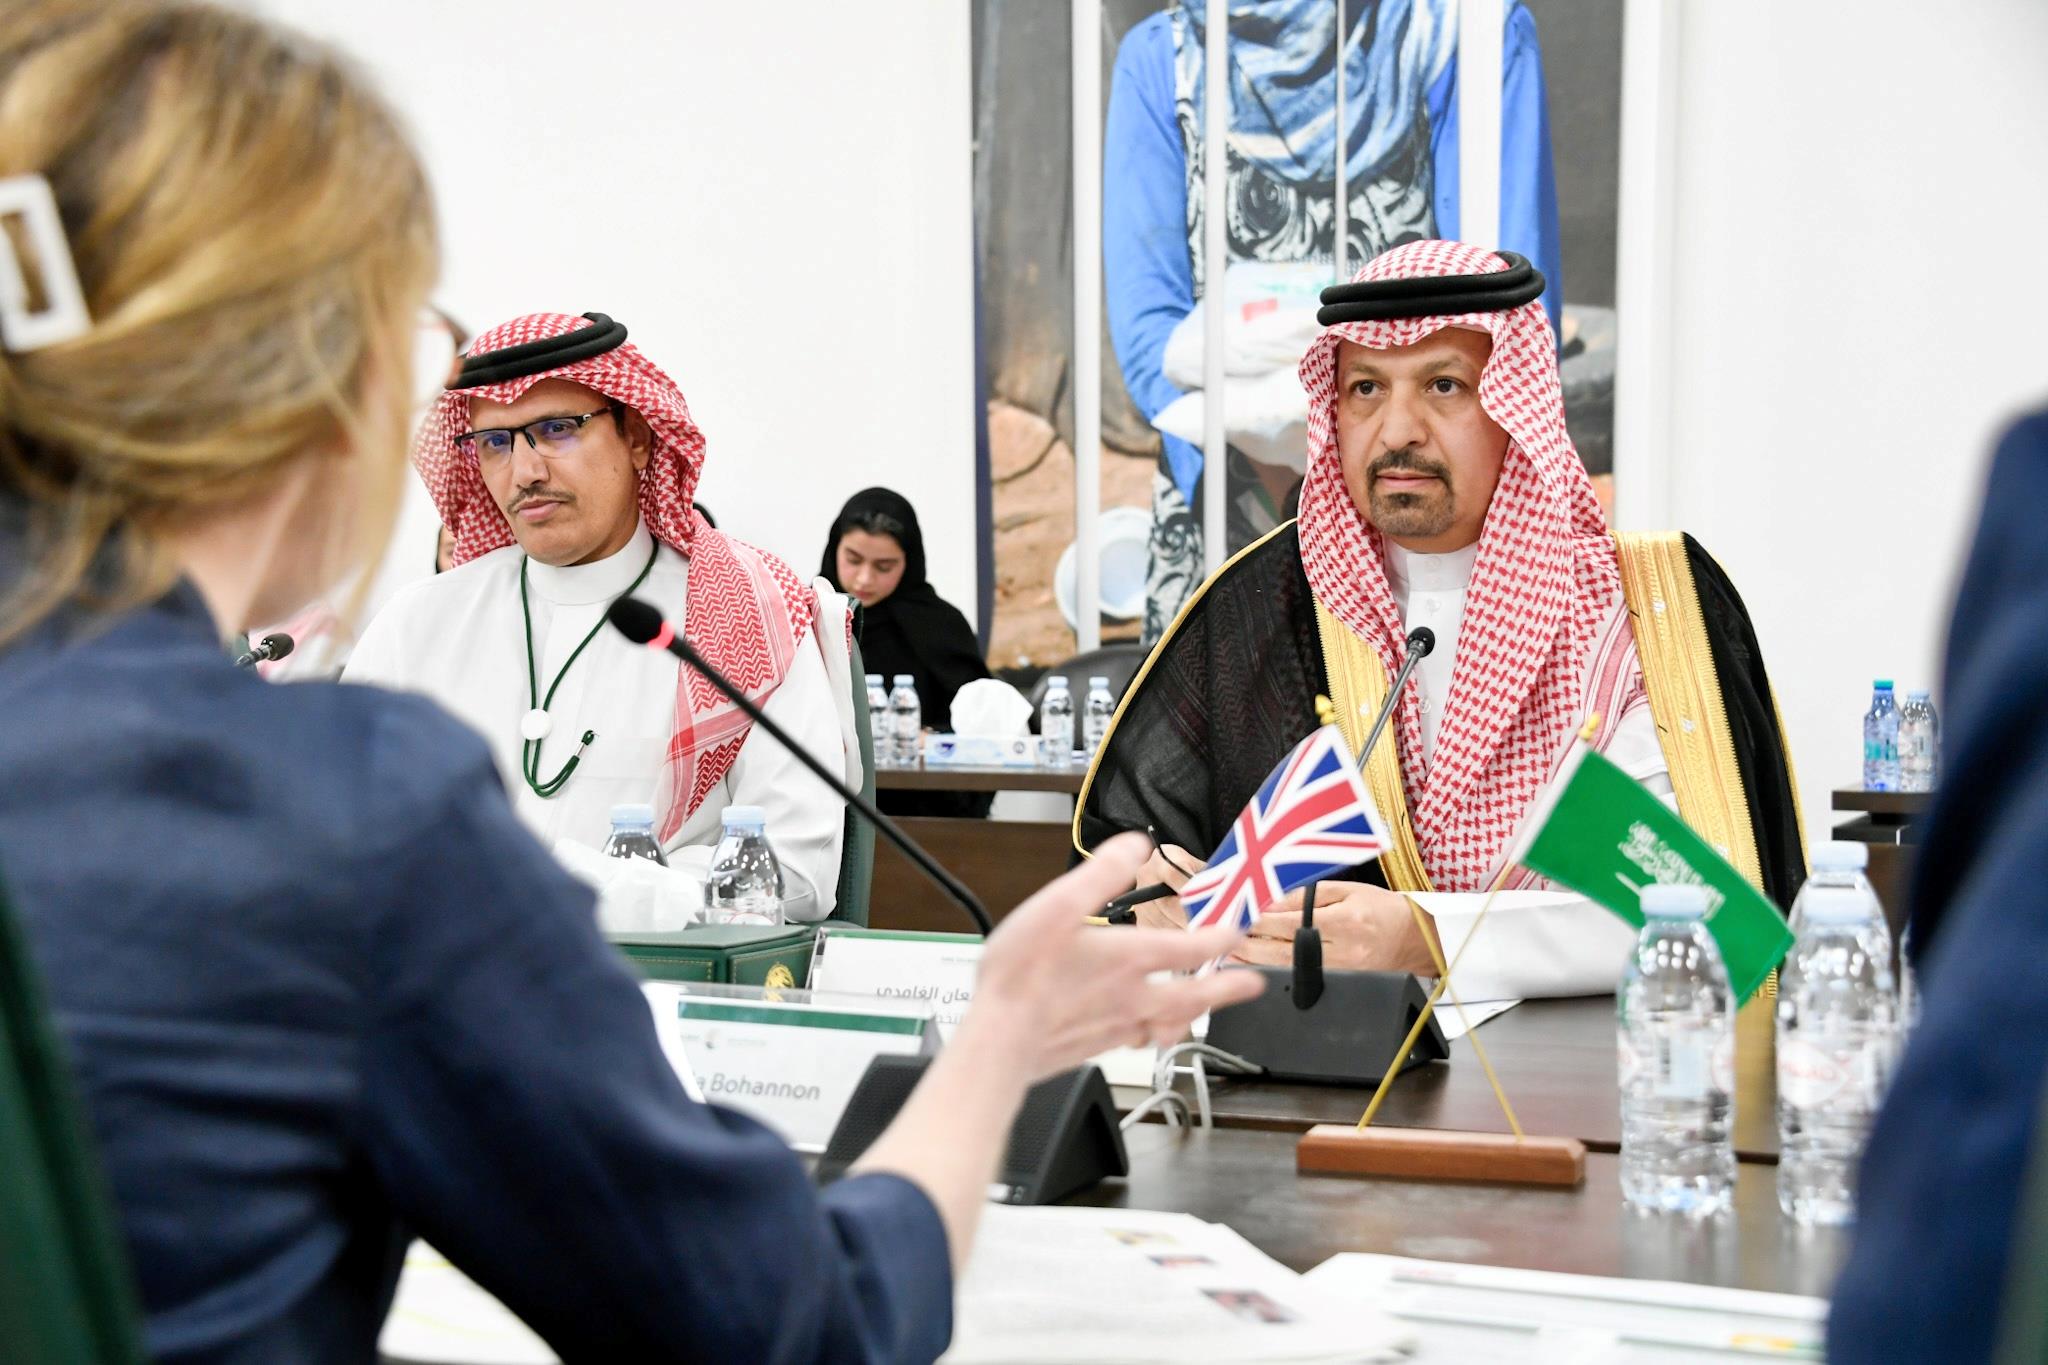 Saudi Arabia and United Kingdom Conclude High-Level Strategic Dialogue on International Development and Humanitarian Assistance